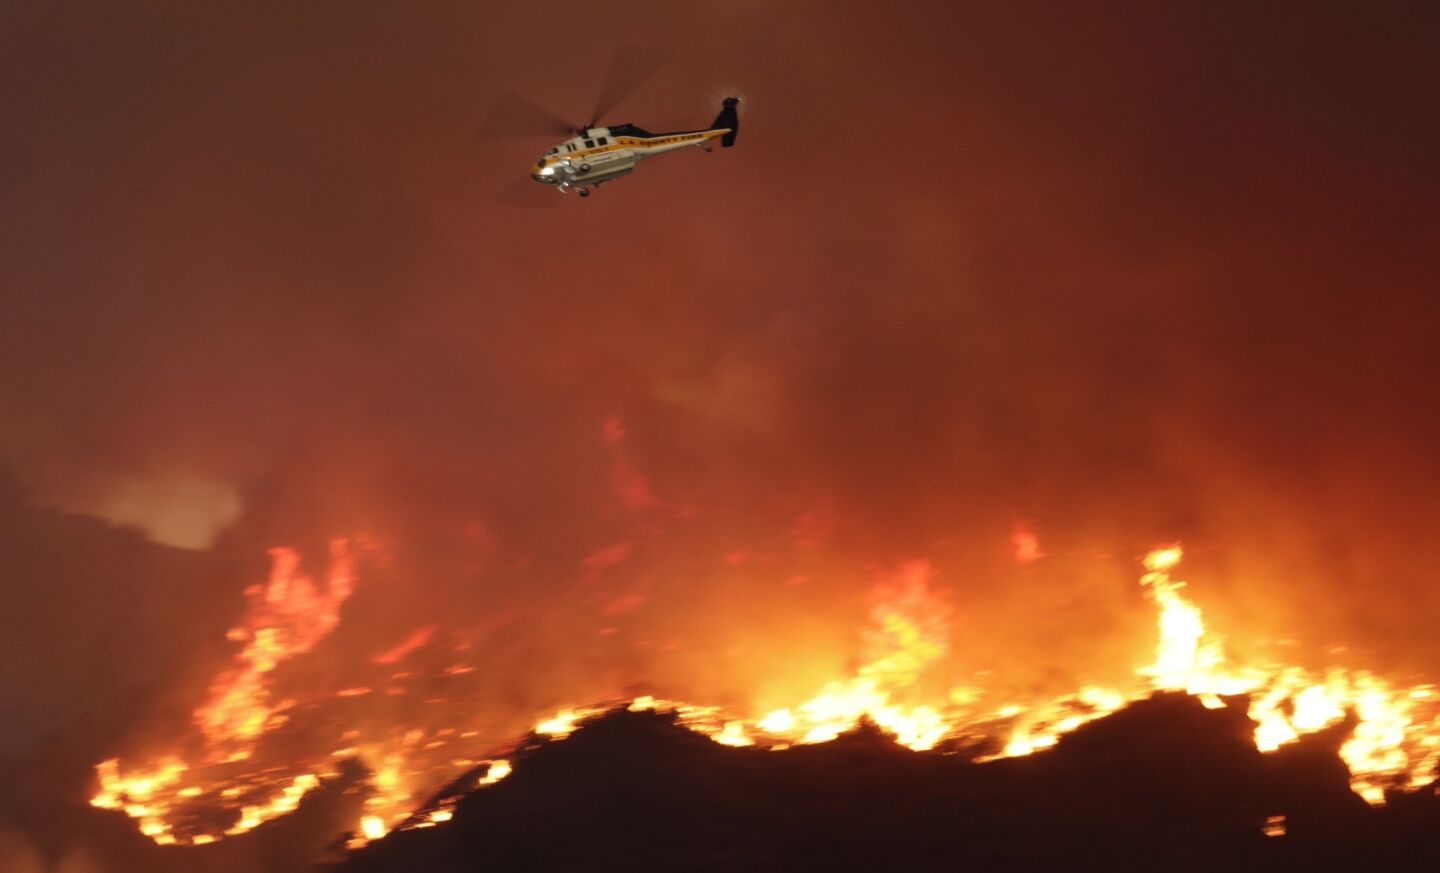 A helicopter flies near the Colby fire burning in the Angeles National Forest.